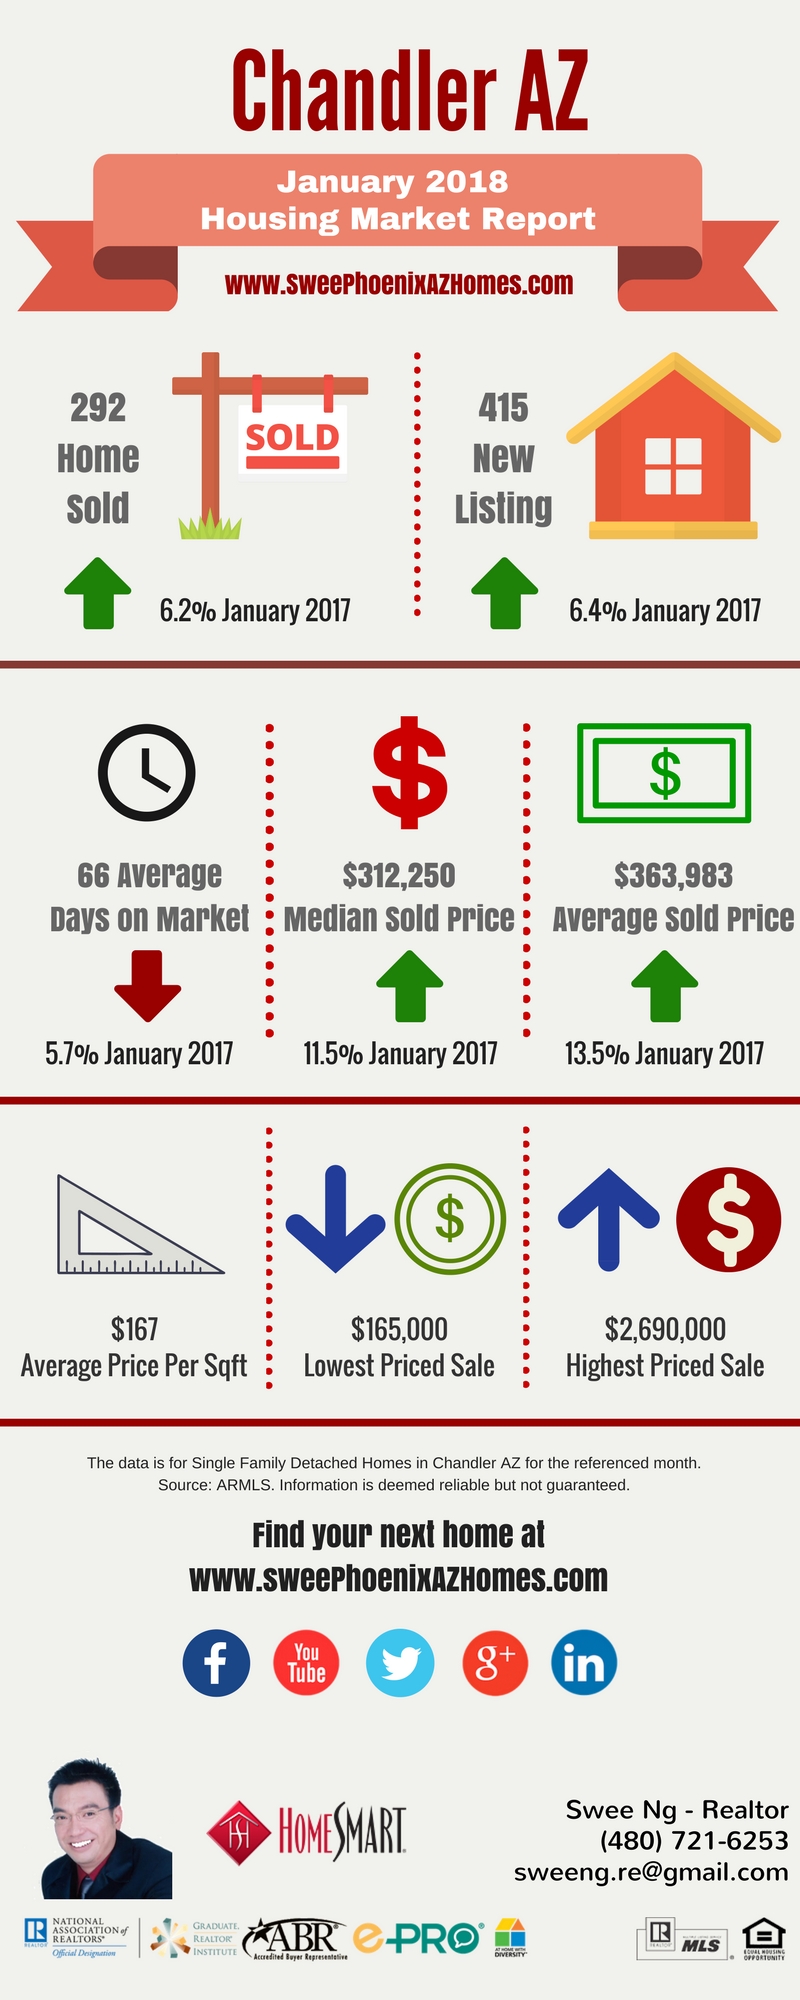 Chandler AZ Housing Market Update January 2018 by Swee Ng, House Value and Real Estate Listings